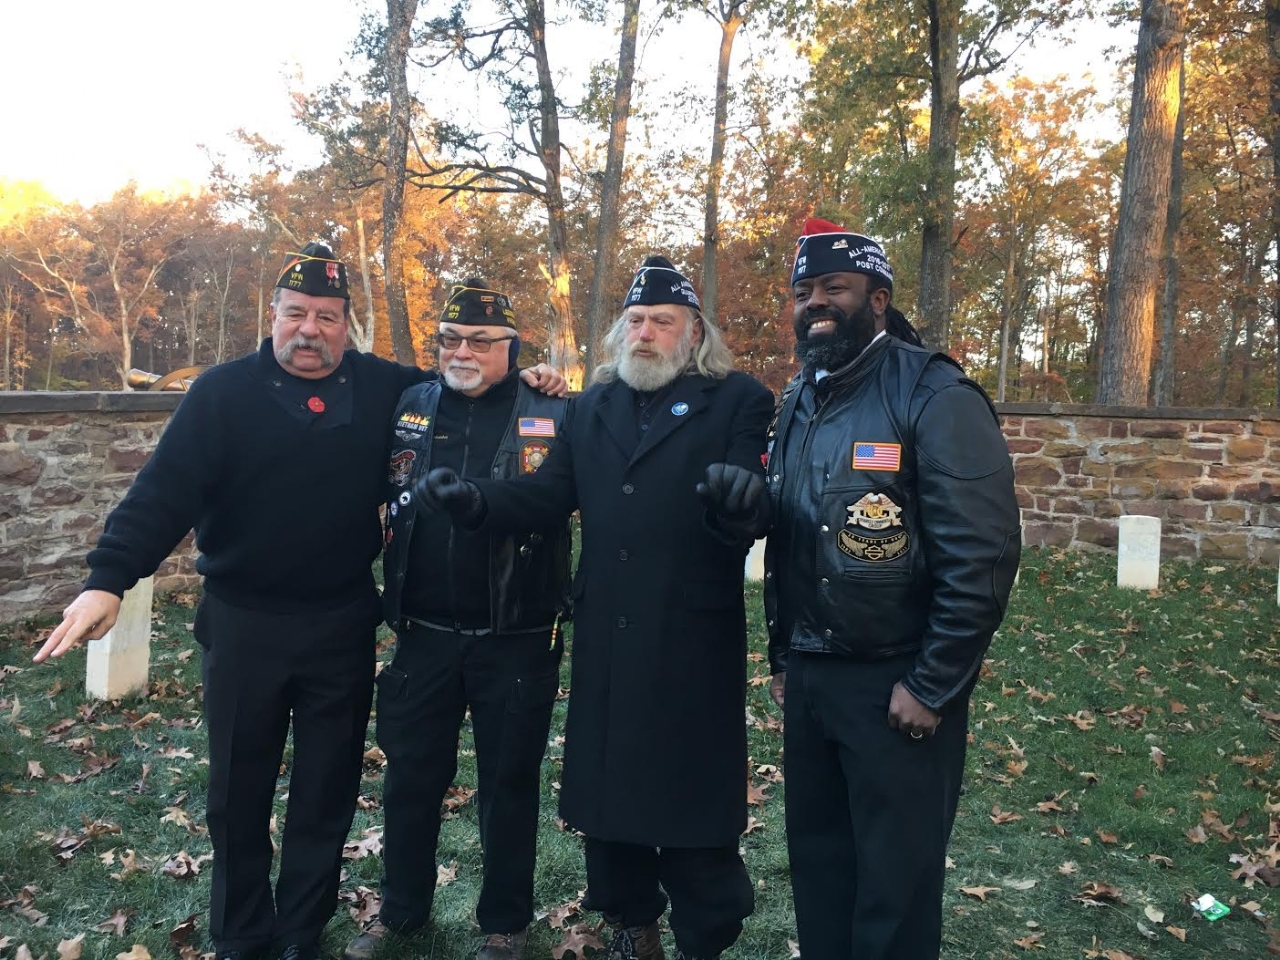 Riders members gather for a photo after the Veterans Day Sunrise Ceremony at Balls Bluff.